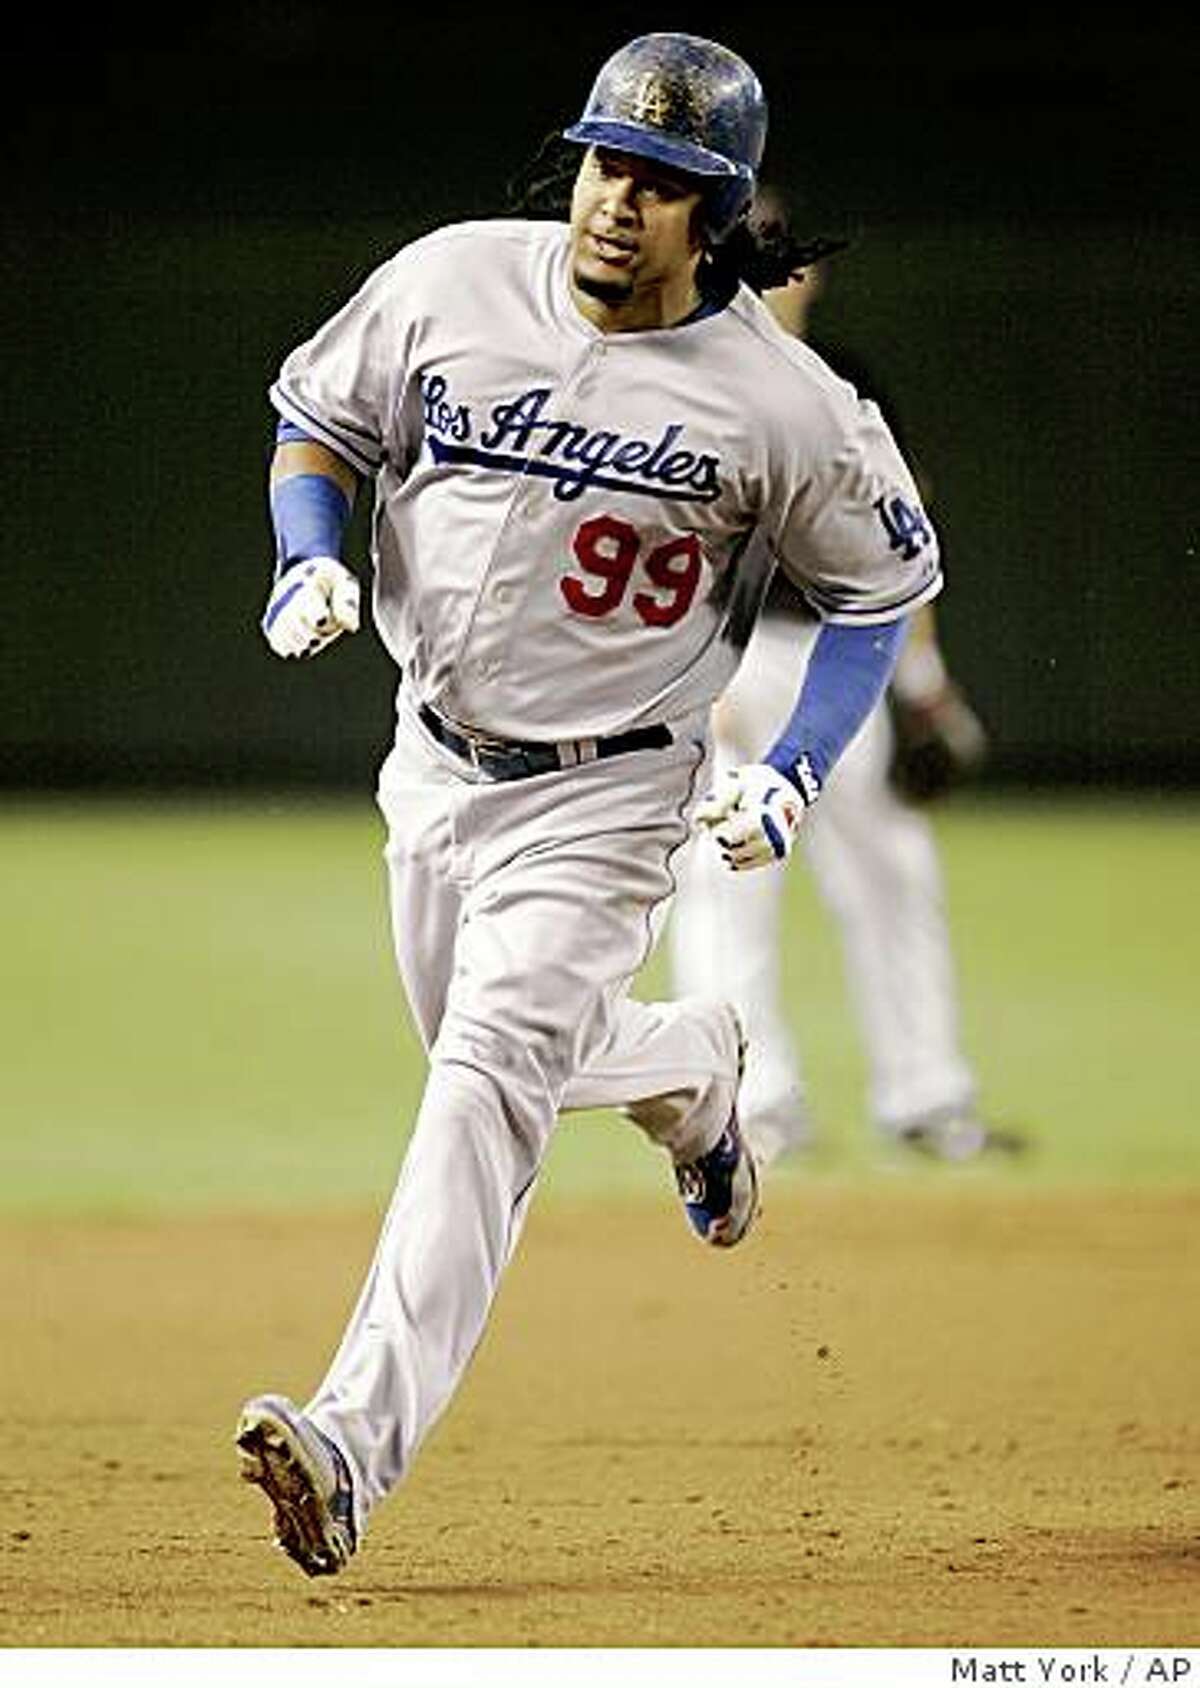 Los Angeles Dodgers' Manny Ramirez approaches third base after hitting a solo home run against the Arizona Diamondbacks during the third inning of a baseball game Saturday, Aug. 30, 2008, in Phoenix. (AP Photo/Matt York)